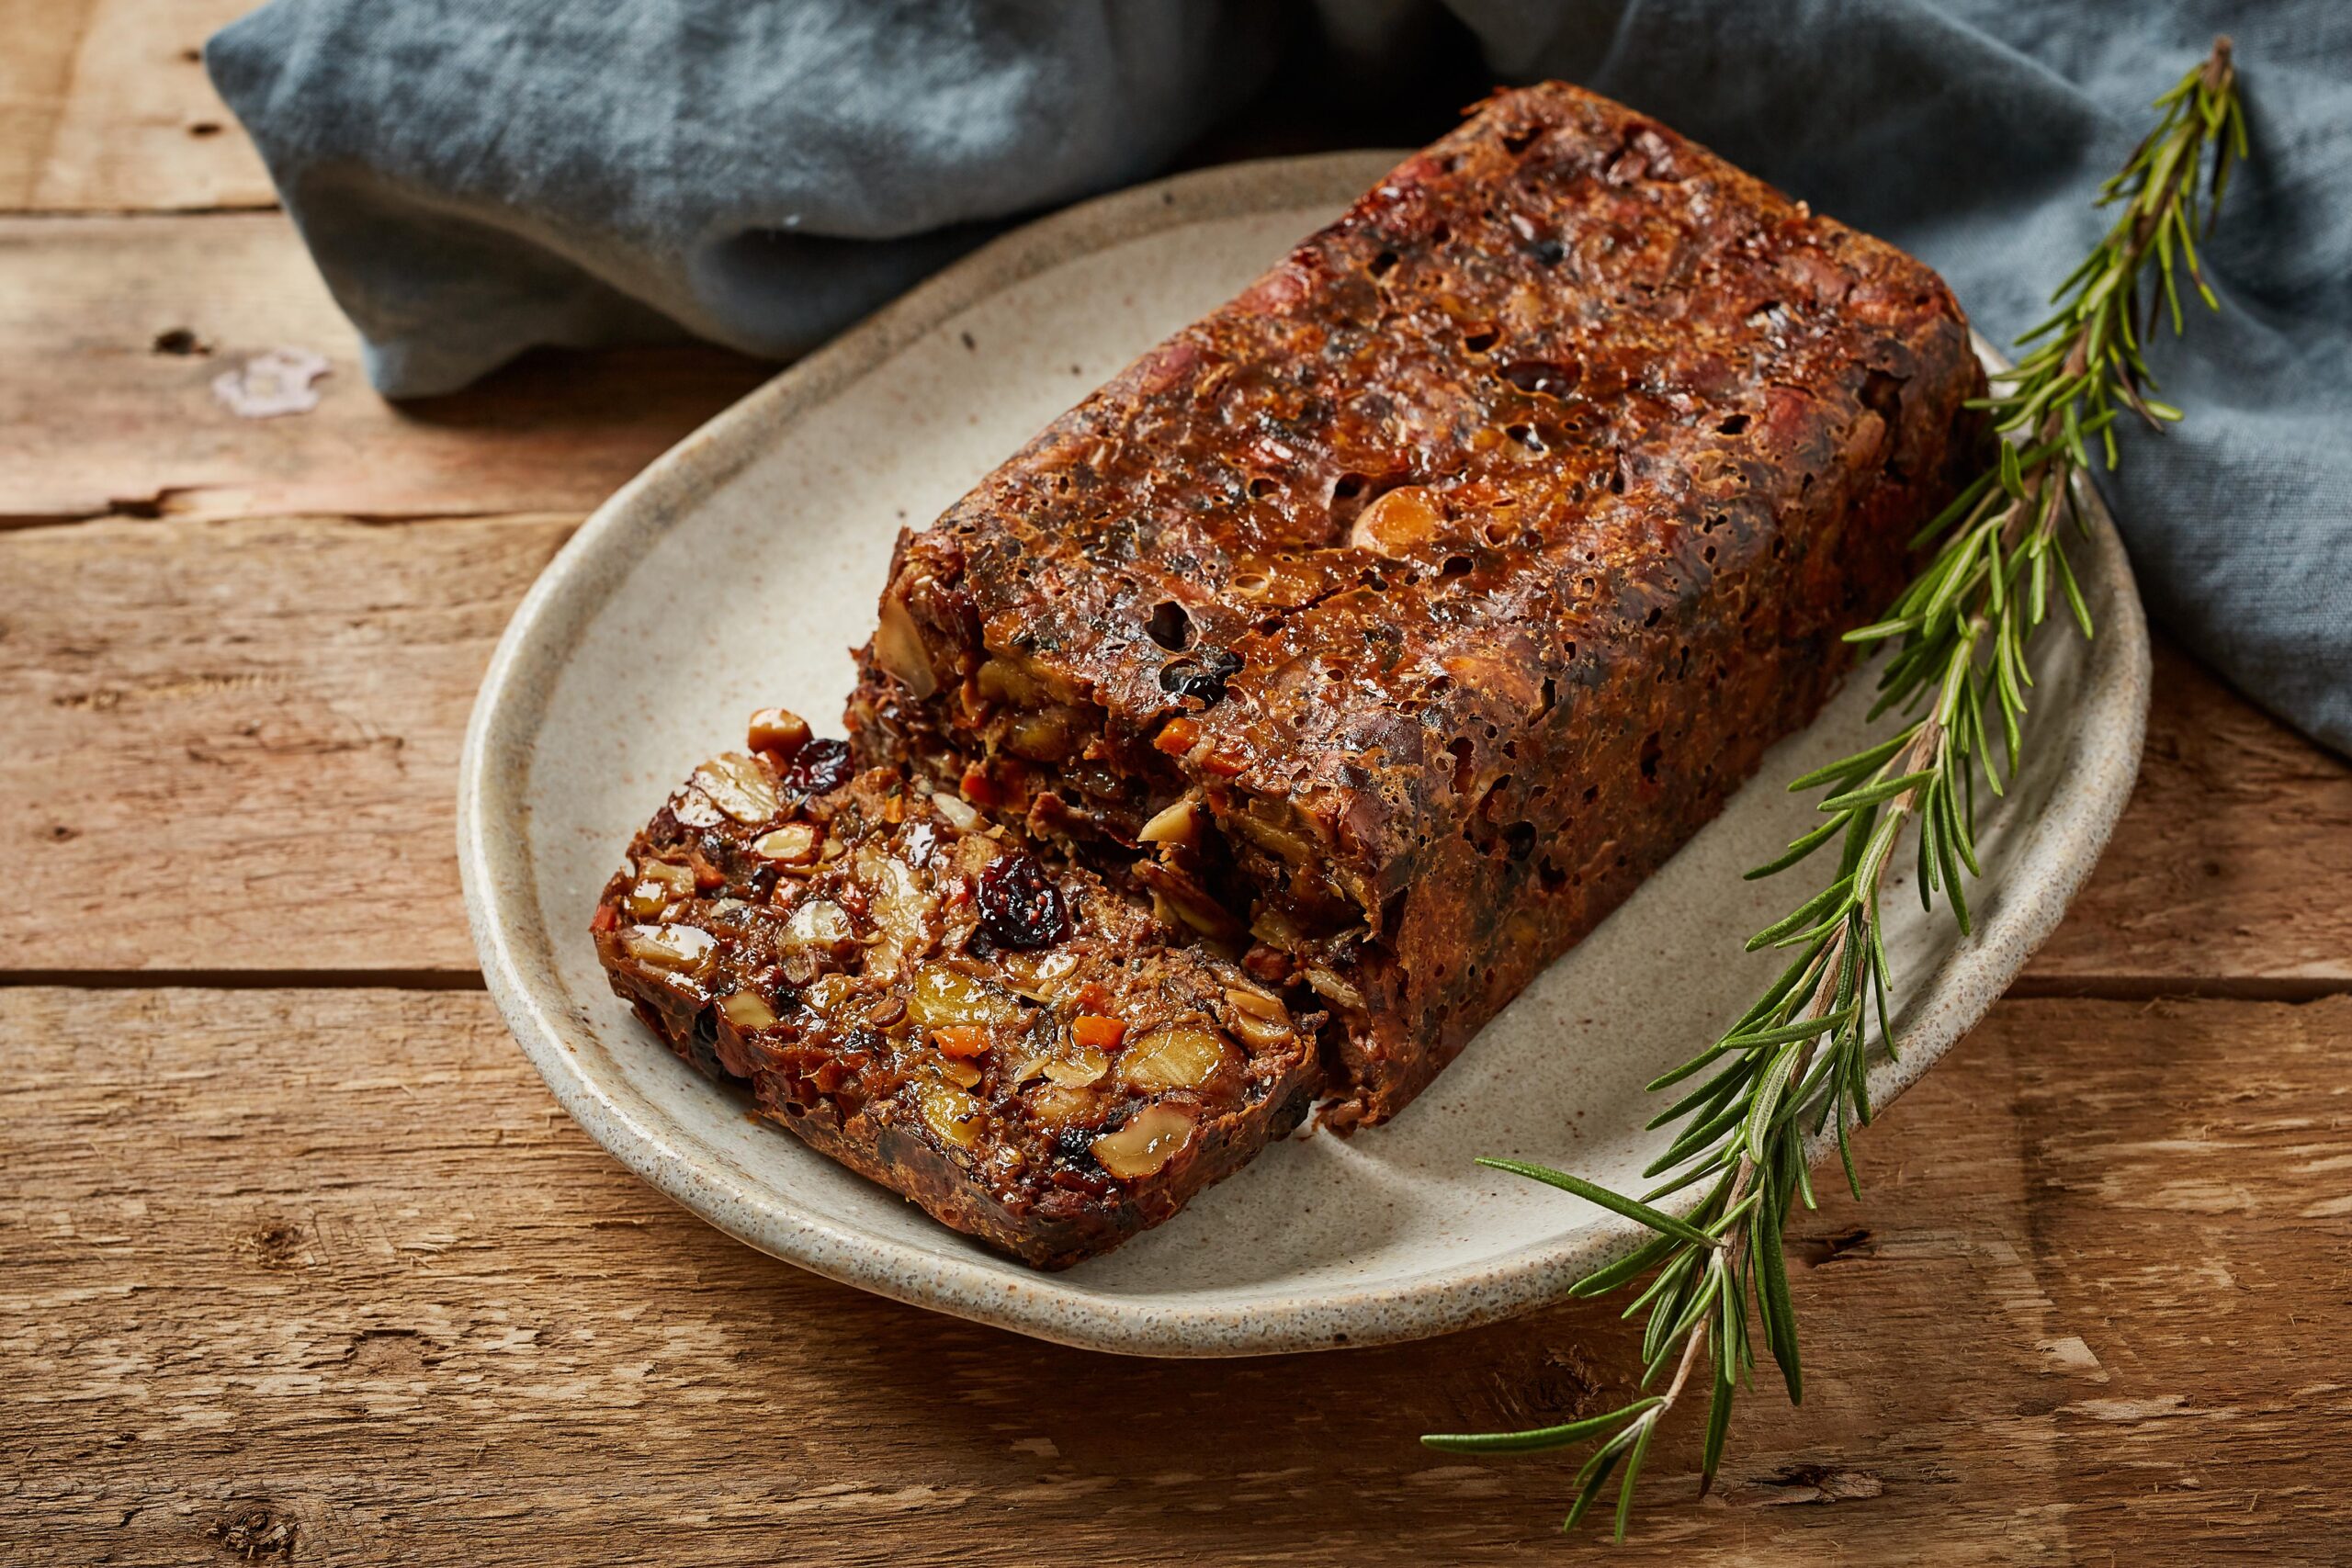  Time to swap out the regular meat loaf for this healthy and hearty alternative.